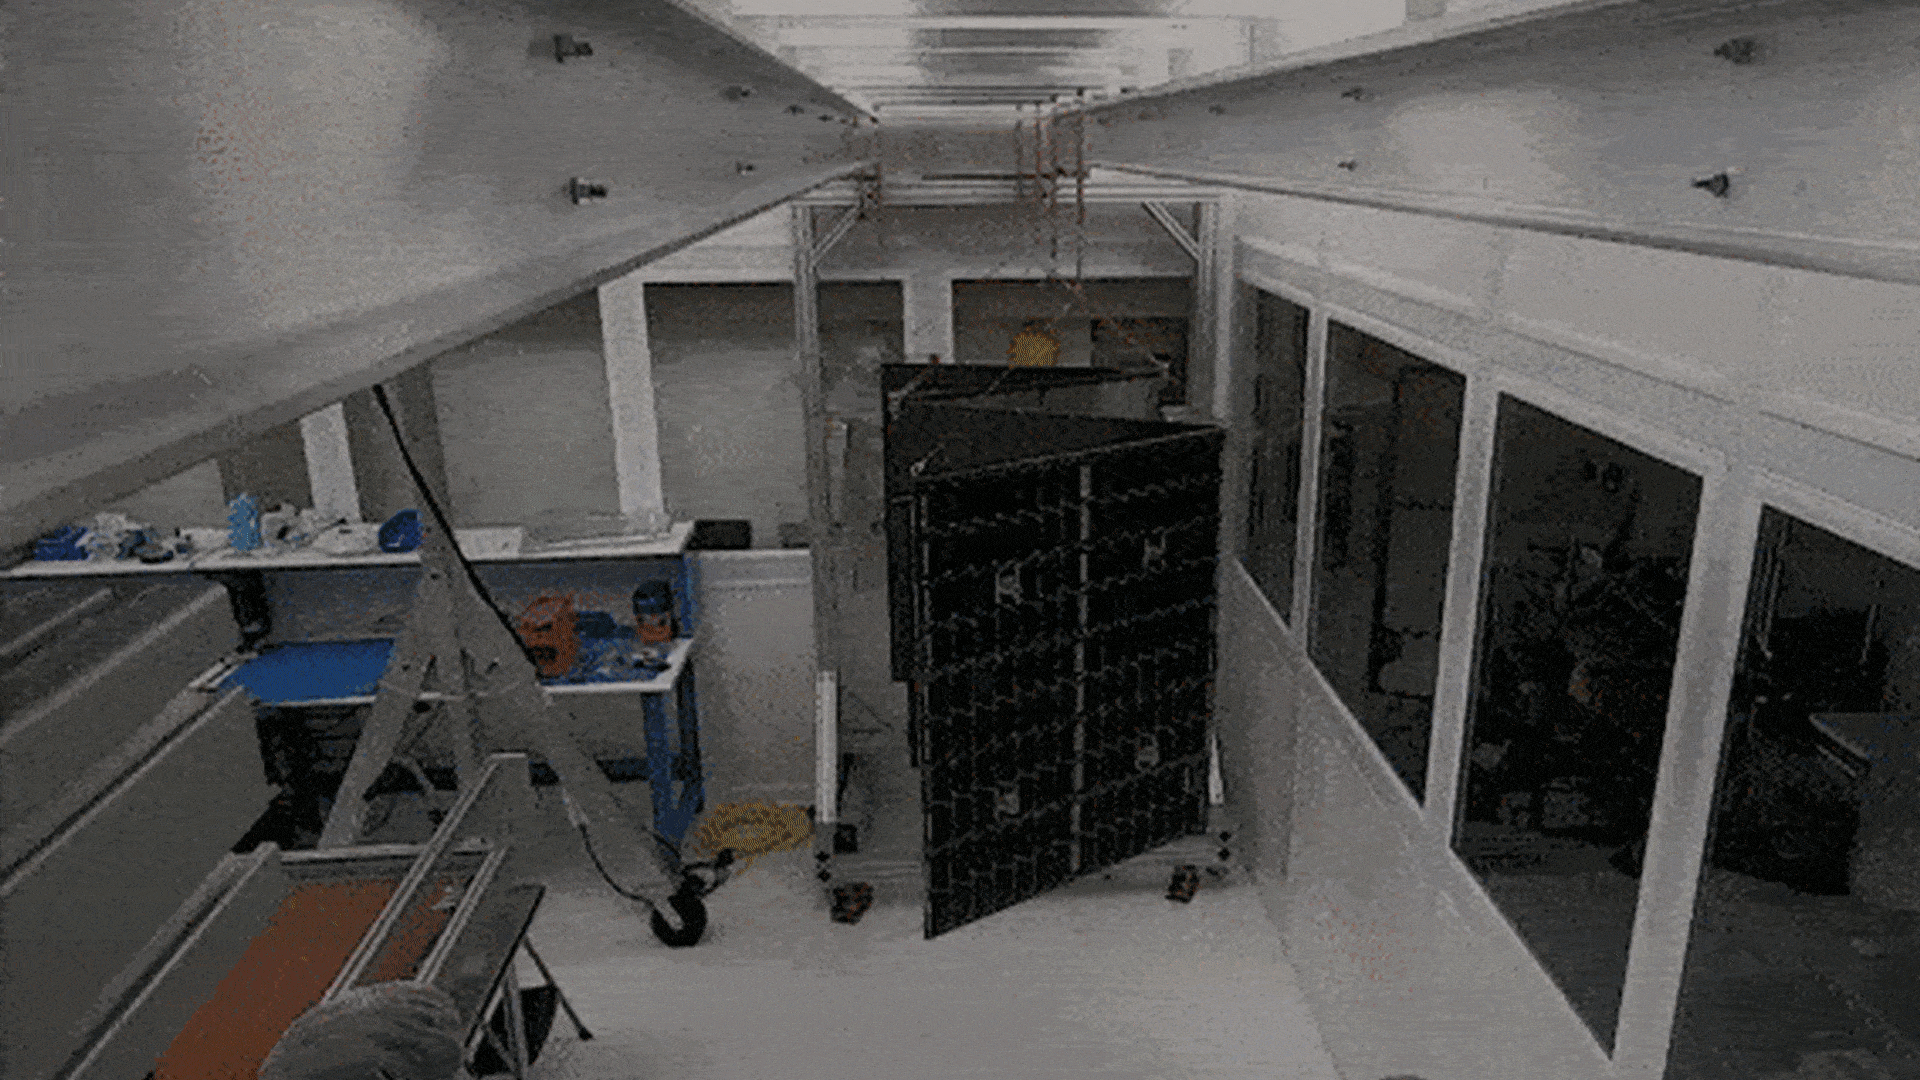 A timelapse of the company building its first commercial satellite.